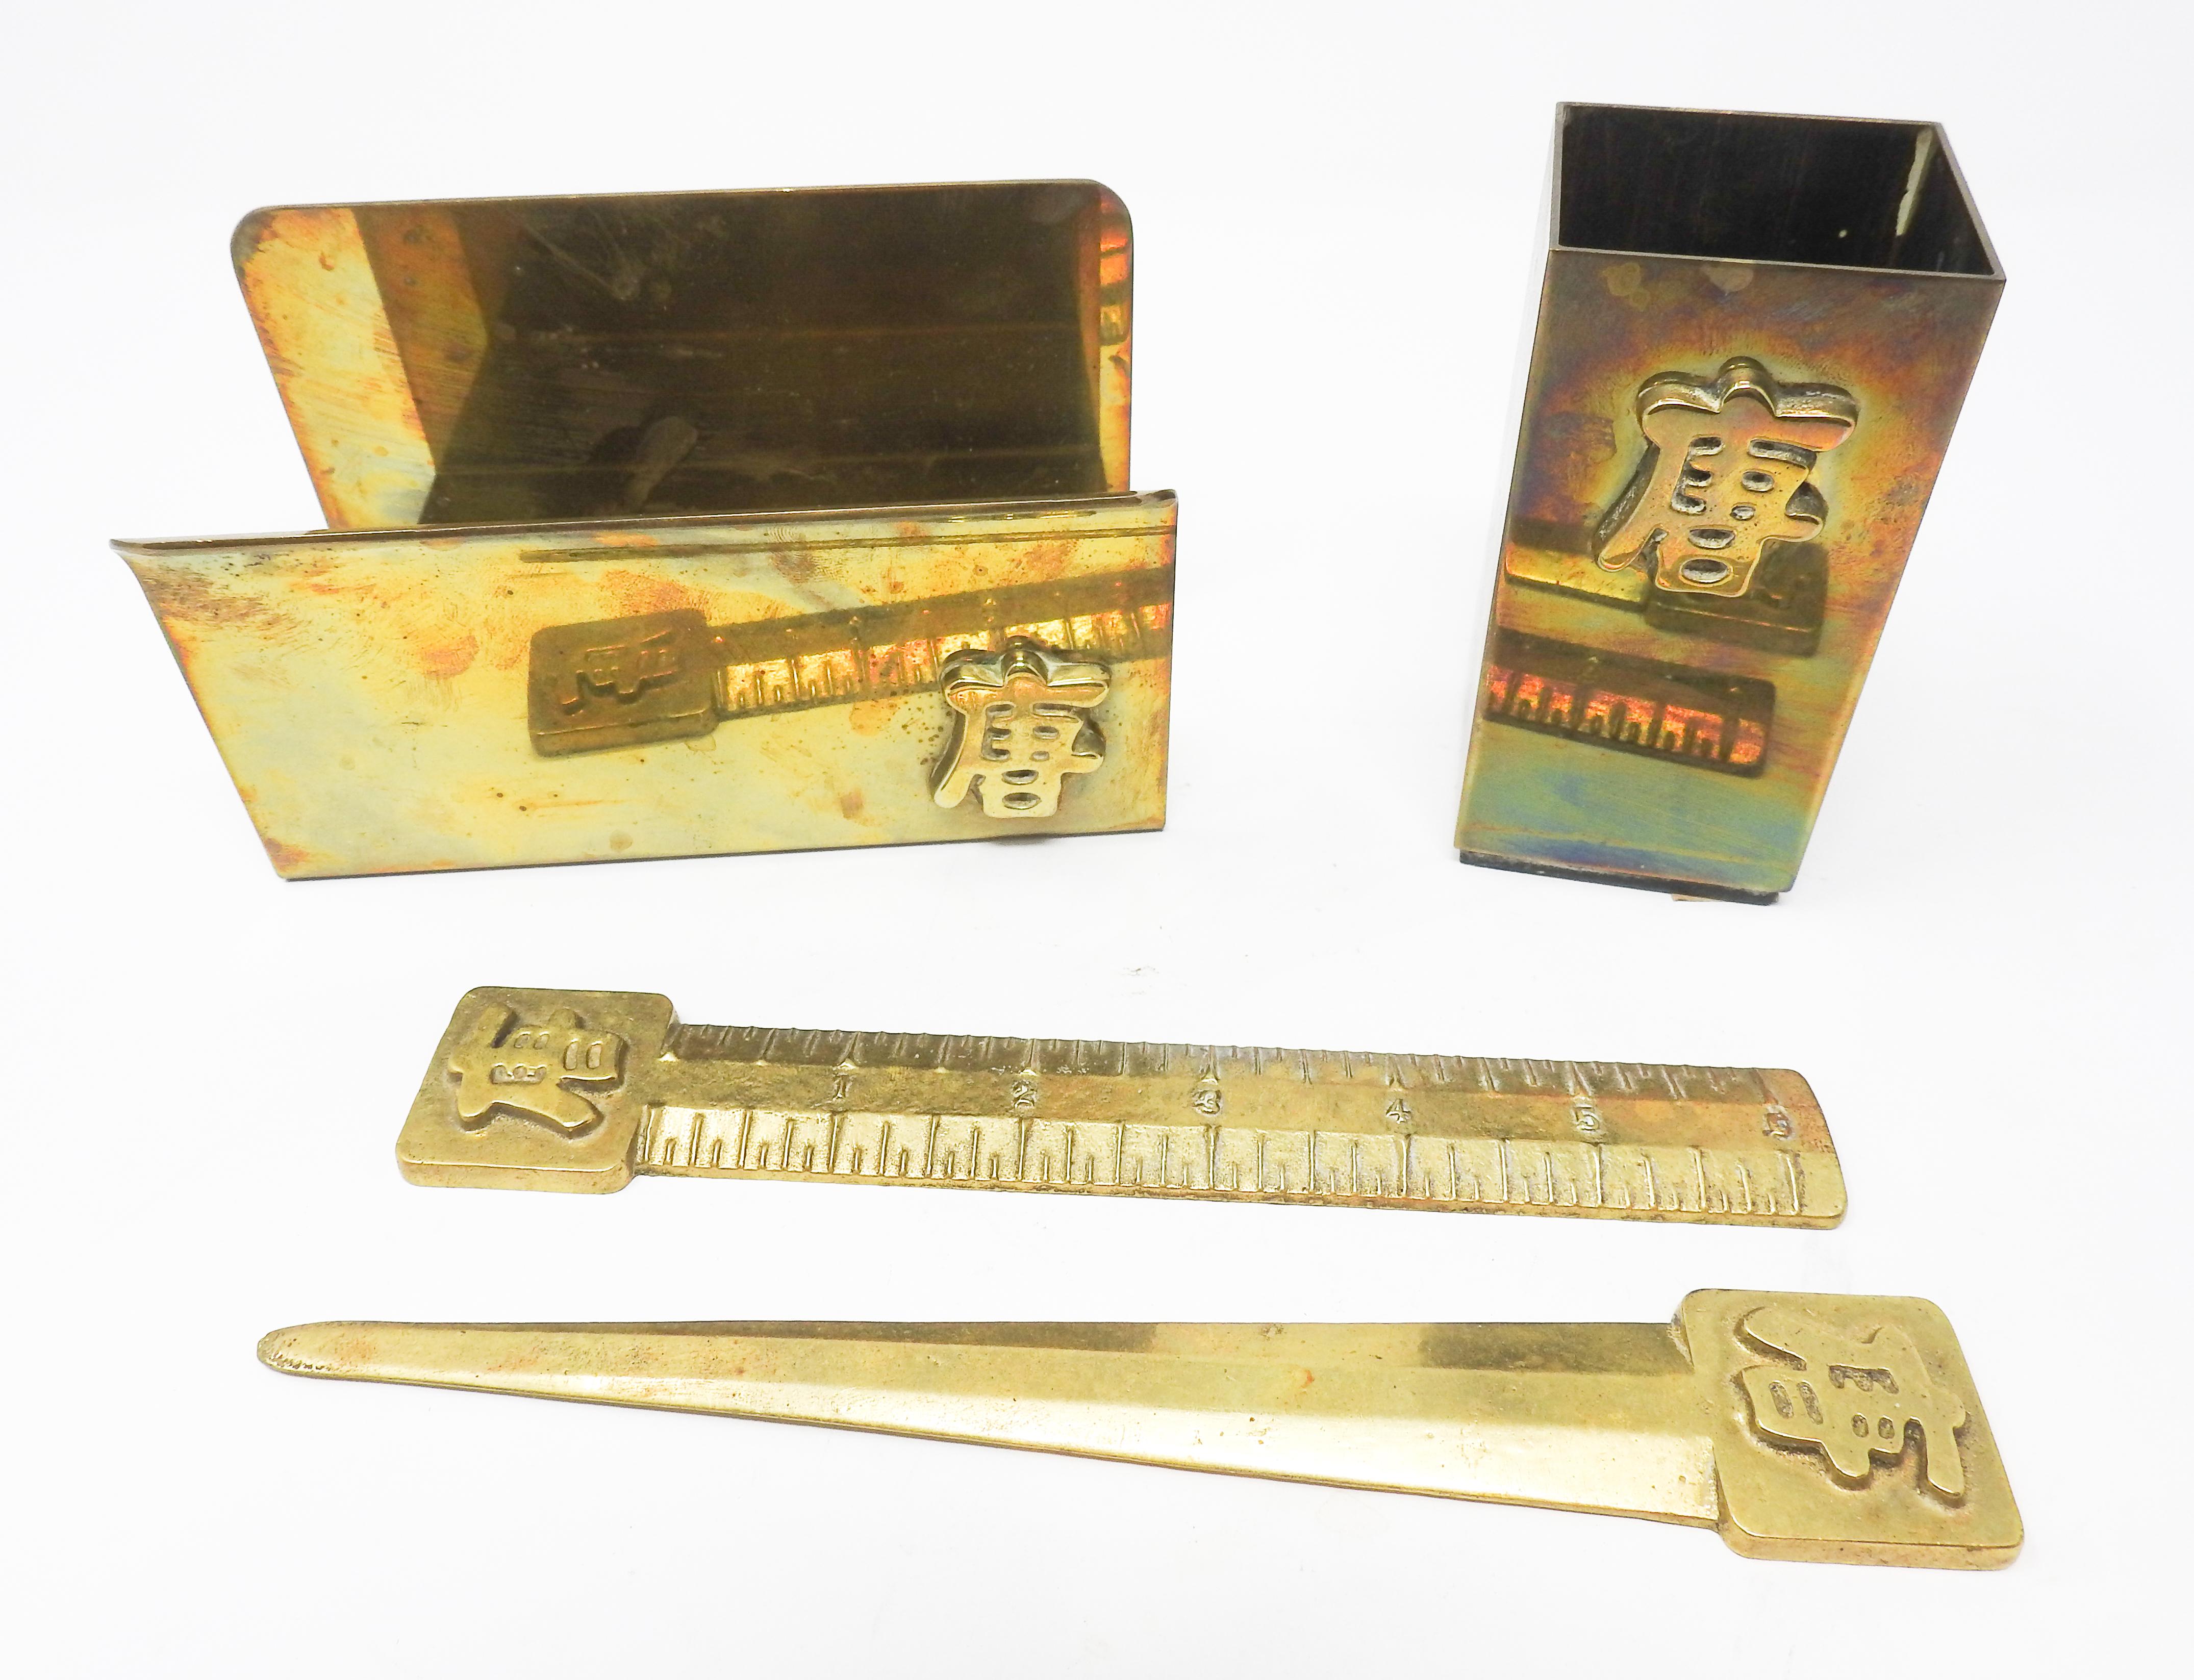 Offering this beautiful and simple brass desk set with Chinese symbol. There are four pieces that complete the set which are a mail or file holder, pen holder, a letter opener, and a ruler. Each piece has the same symbol on them and the ruler is